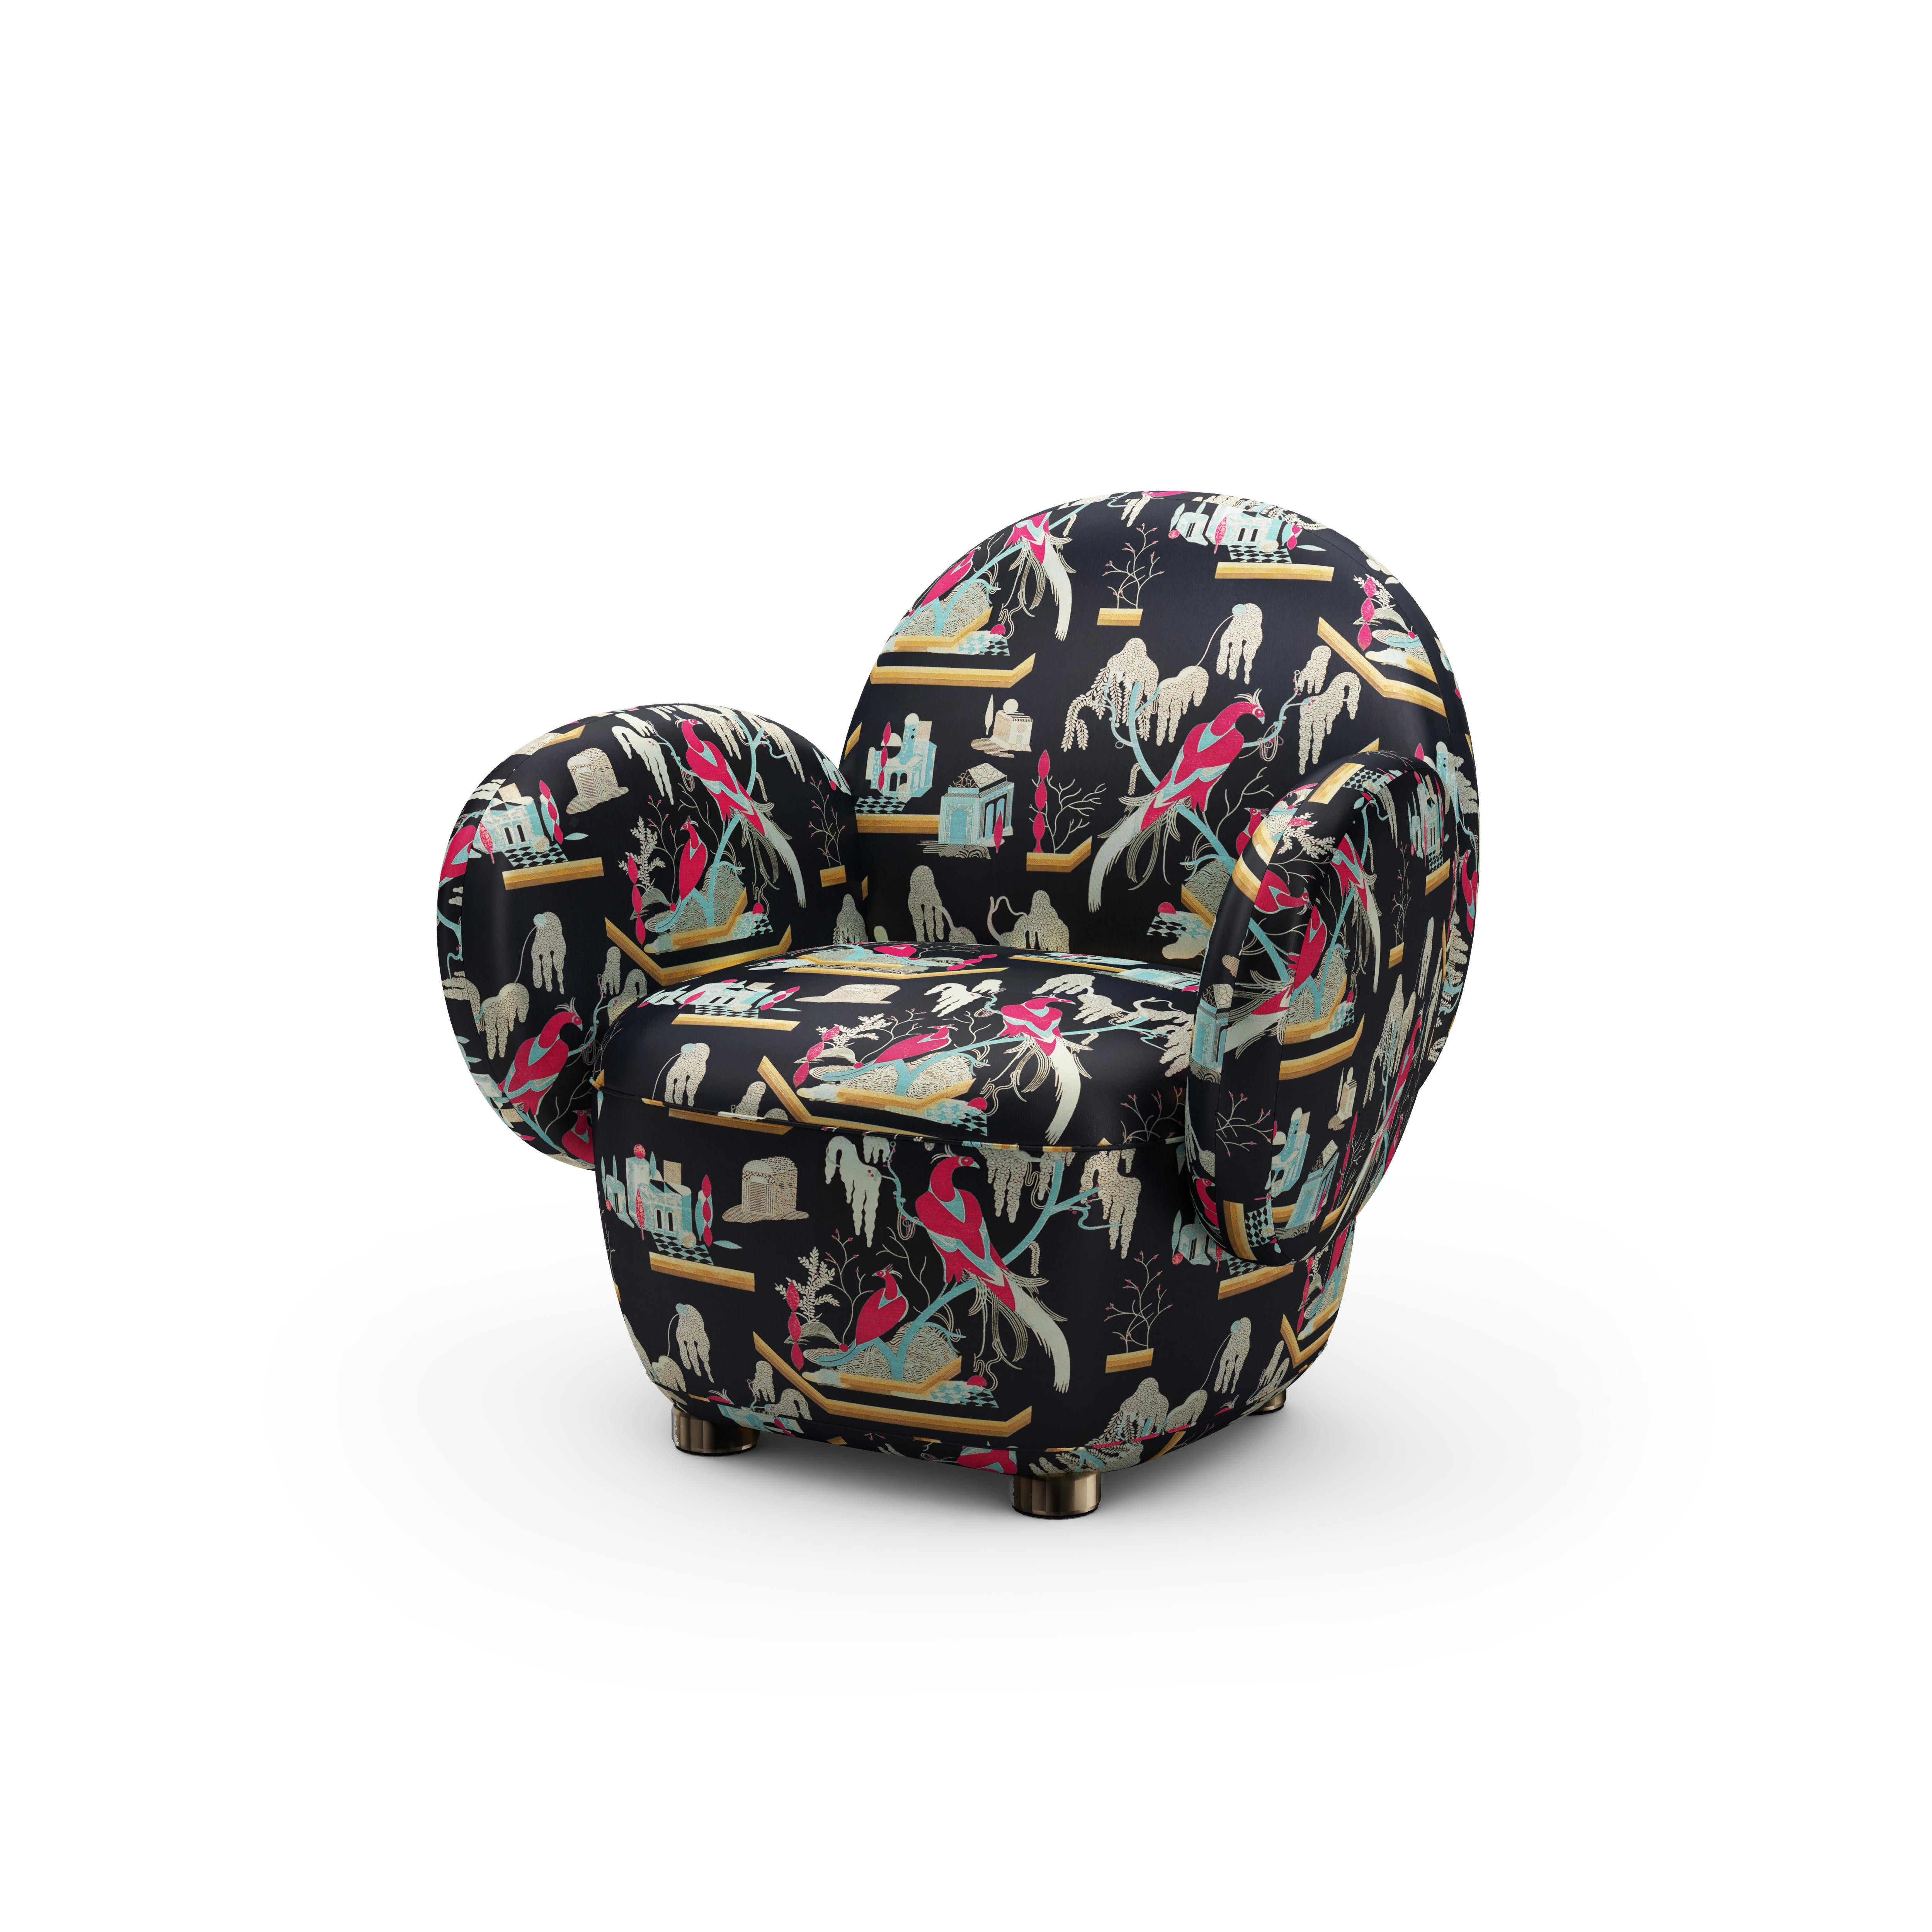 Dolce Armchair is an exquisite single seater sofa, which can be used on its own or with the Dolce Sofa. Its upholstered in the plush black-pink jacquard fabric, This Must Be The Place by Dedar Milano. Ideal for playful lazing! Designed by Matteo